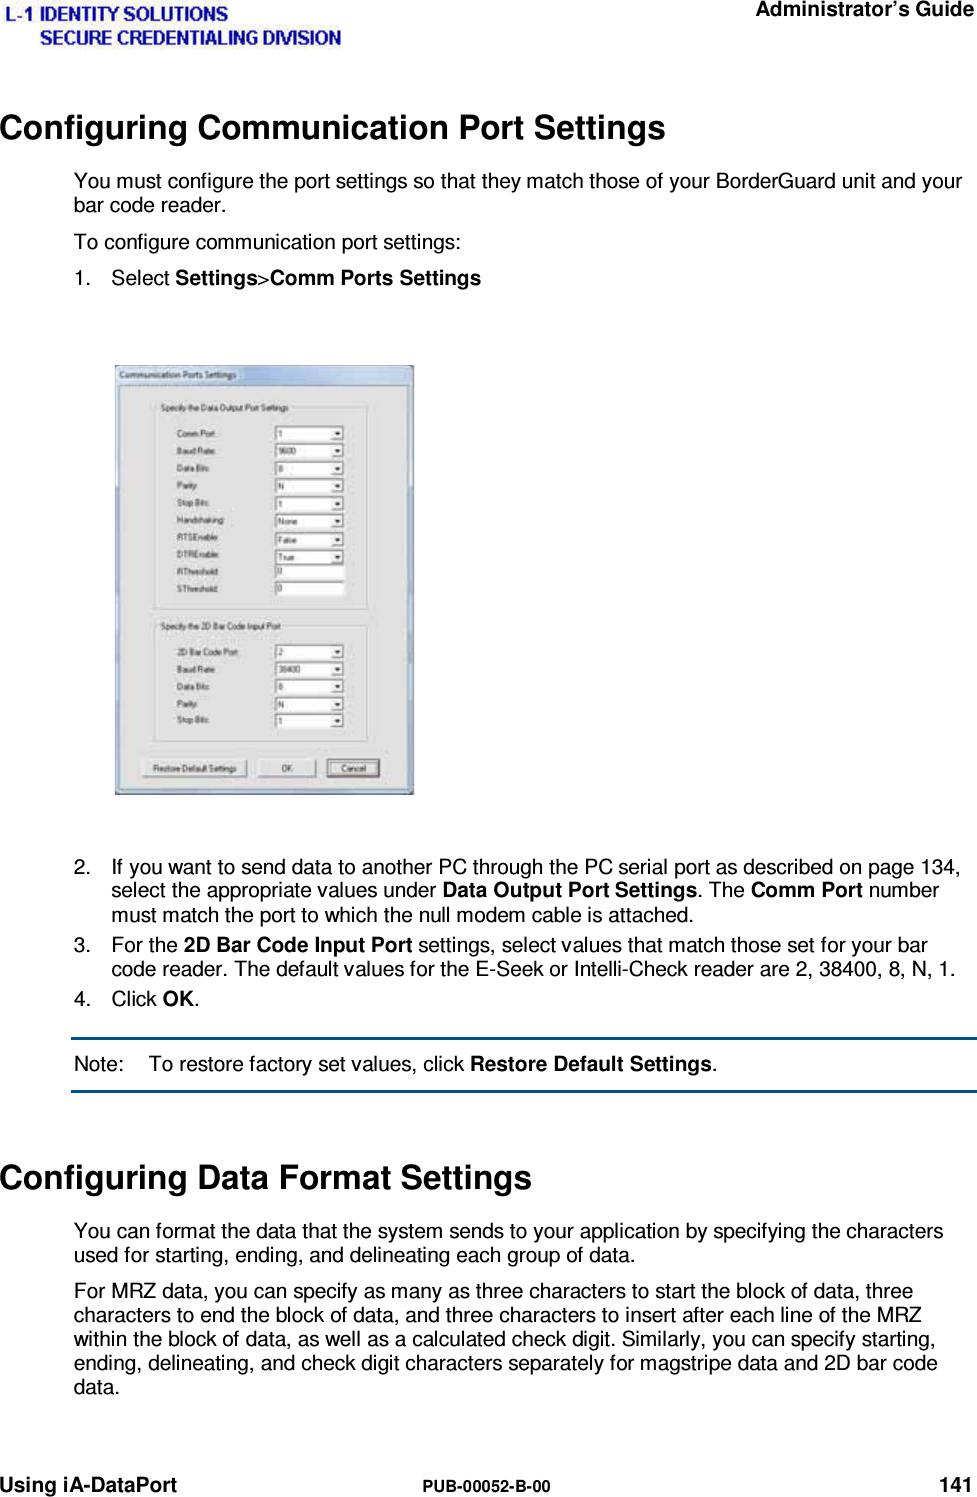   Administrator’s Guide Using iA-DataPort  PUB-00052-B-00 141 Configuring Communication Port Settings You must configure the port settings so that they match those of your BorderGuard unit and your bar code reader. To configure communication port settings: 1. Select Settings&gt;Comm Ports Settings   2.  If you want to send data to another PC through the PC serial port as described on page 134, select the appropriate values under Data Output Port Settings. The Comm Port number must match the port to which the null modem cable is attached. 3. For the 2D Bar Code Input Port settings, select values that match those set for your bar code reader. The default values for the E-Seek or Intelli-Check reader are 2, 38400, 8, N, 1. 4. Click OK. Note:  To restore factory set values, click Restore Default Settings. Configuring Data Format Settings You can format the data that the system sends to your application by specifying the characters used for starting, ending, and delineating each group of data. For MRZ data, you can specify as many as three characters to start the block of data, three characters to end the block of data, and three characters to insert after each line of the MRZ within the block of data, as well as a calculated check digit. Similarly, you can specify starting, ending, delineating, and check digit characters separately for magstripe data and 2D bar code data. 